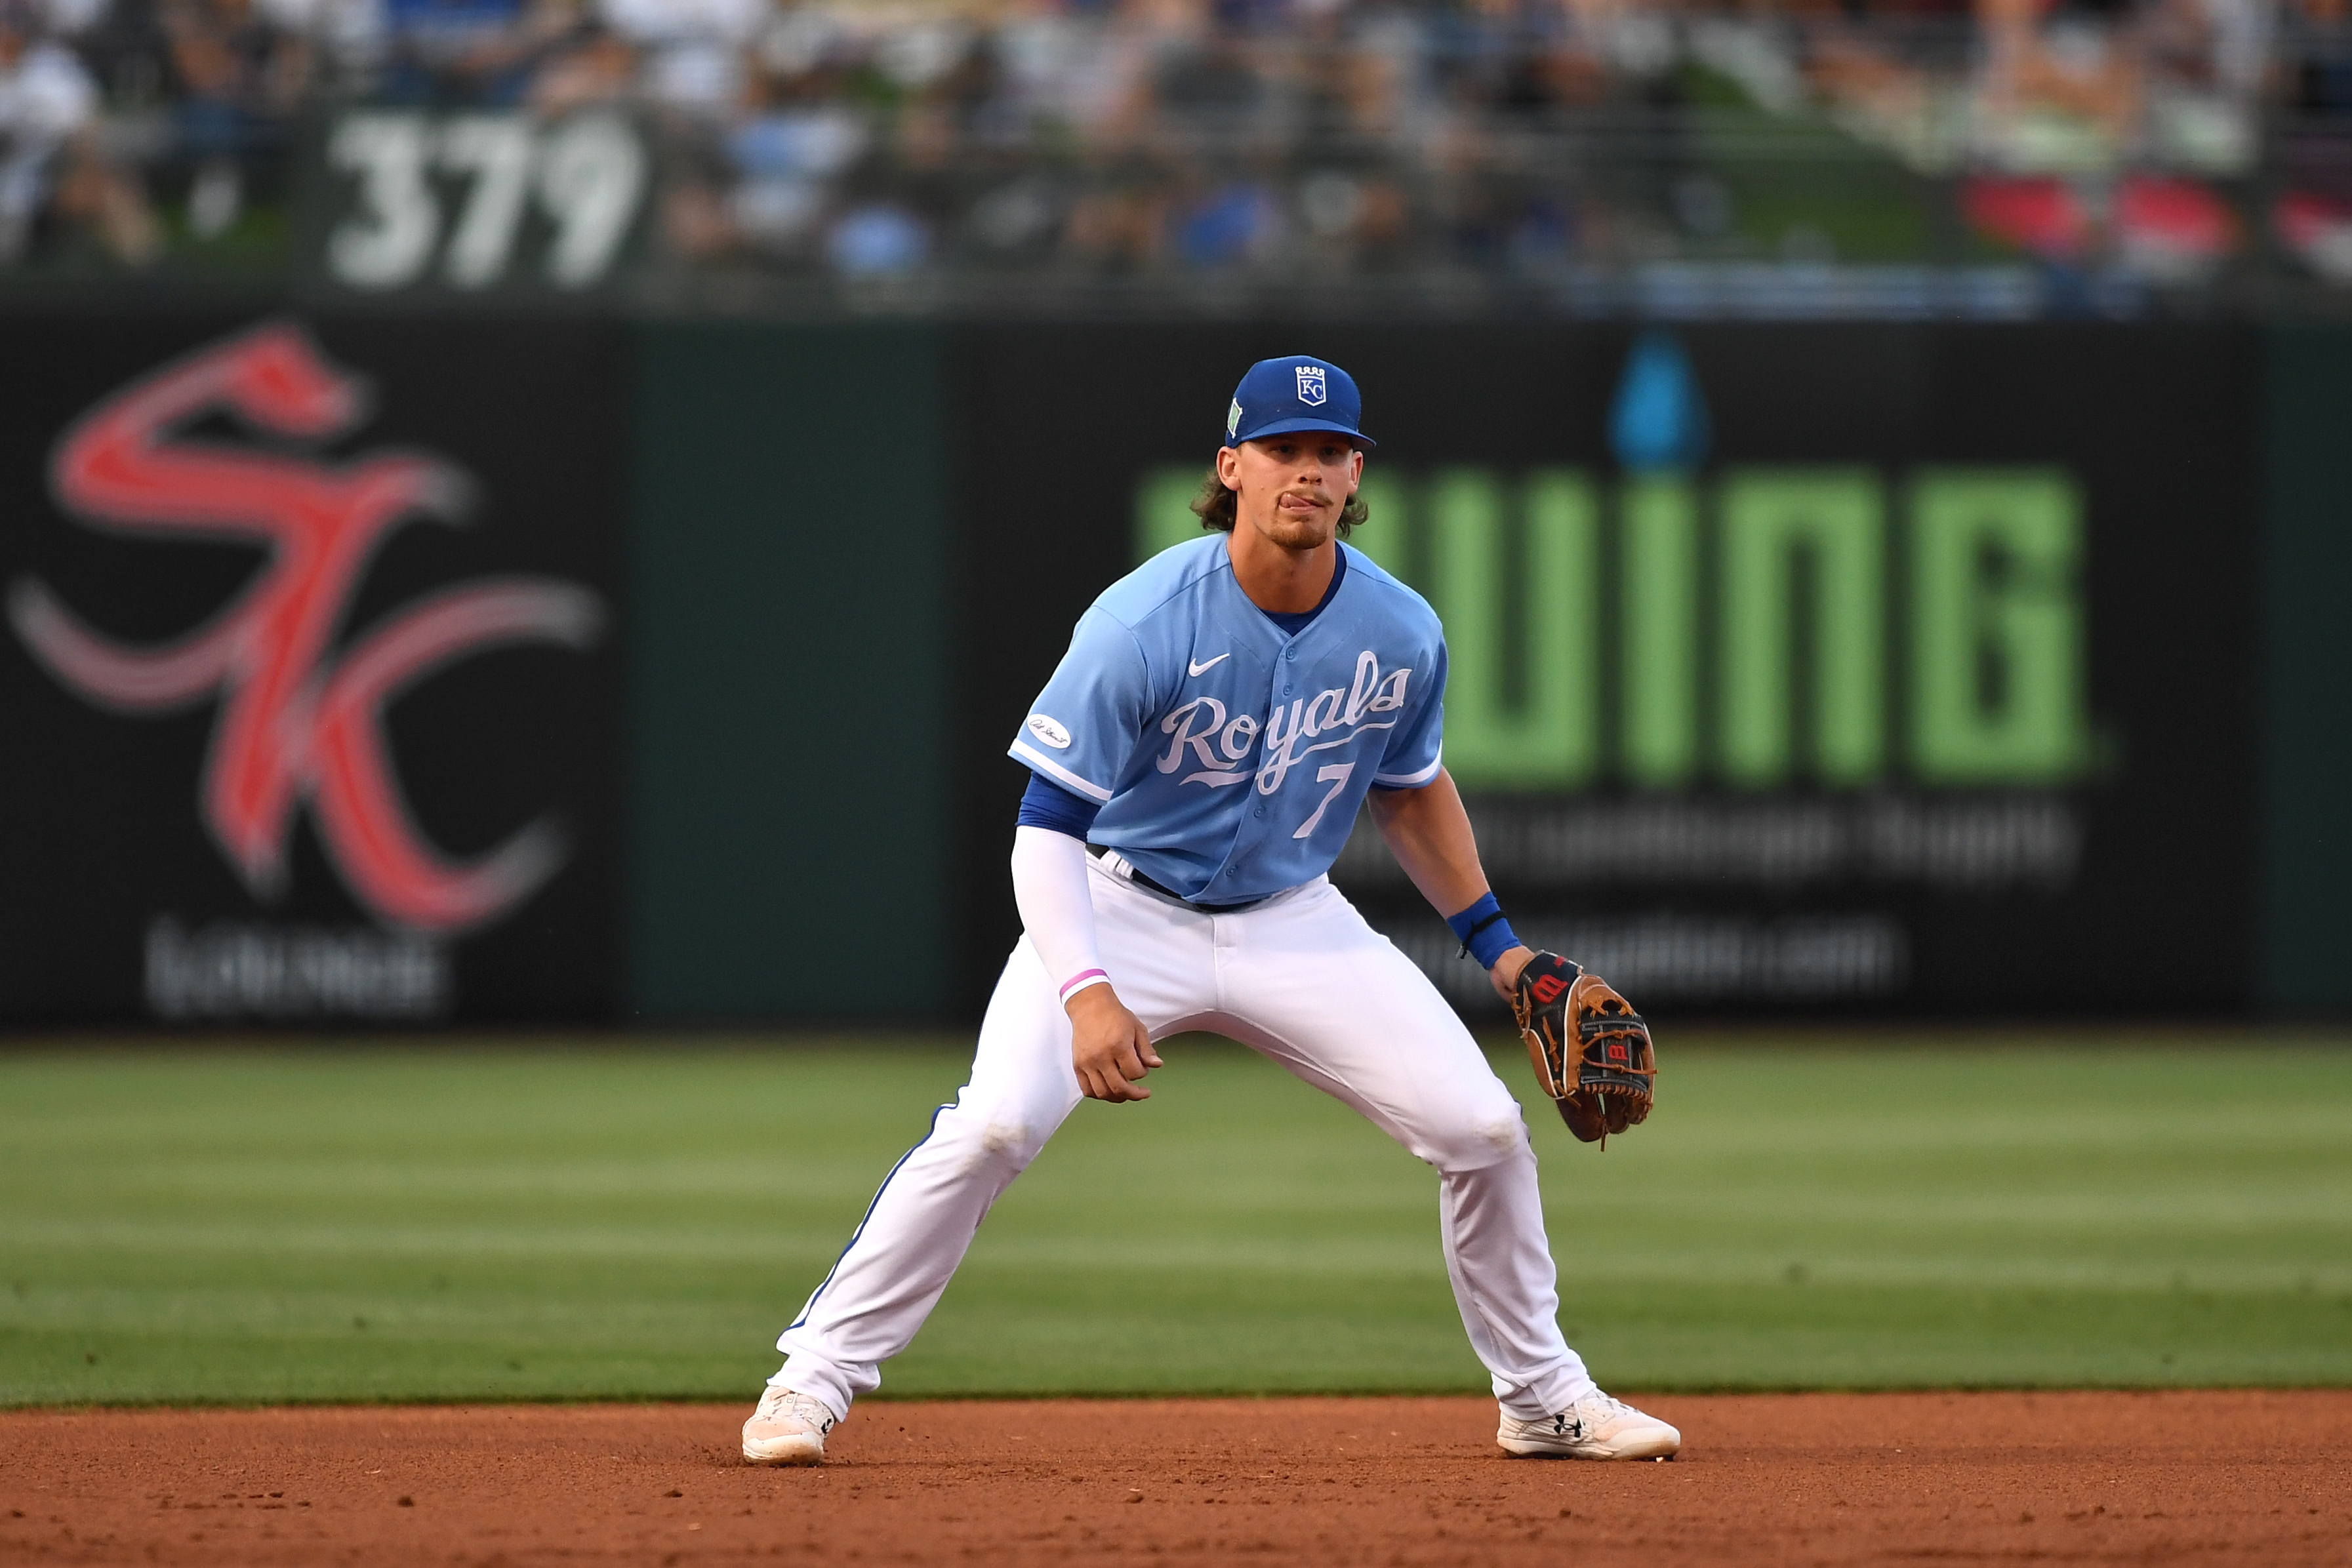 Kansas City Royals infielder and top MLB prospect Bobby Witt Jr. in fielding position during a Spring Training game against the Los Angeles Dodgers in March 2022